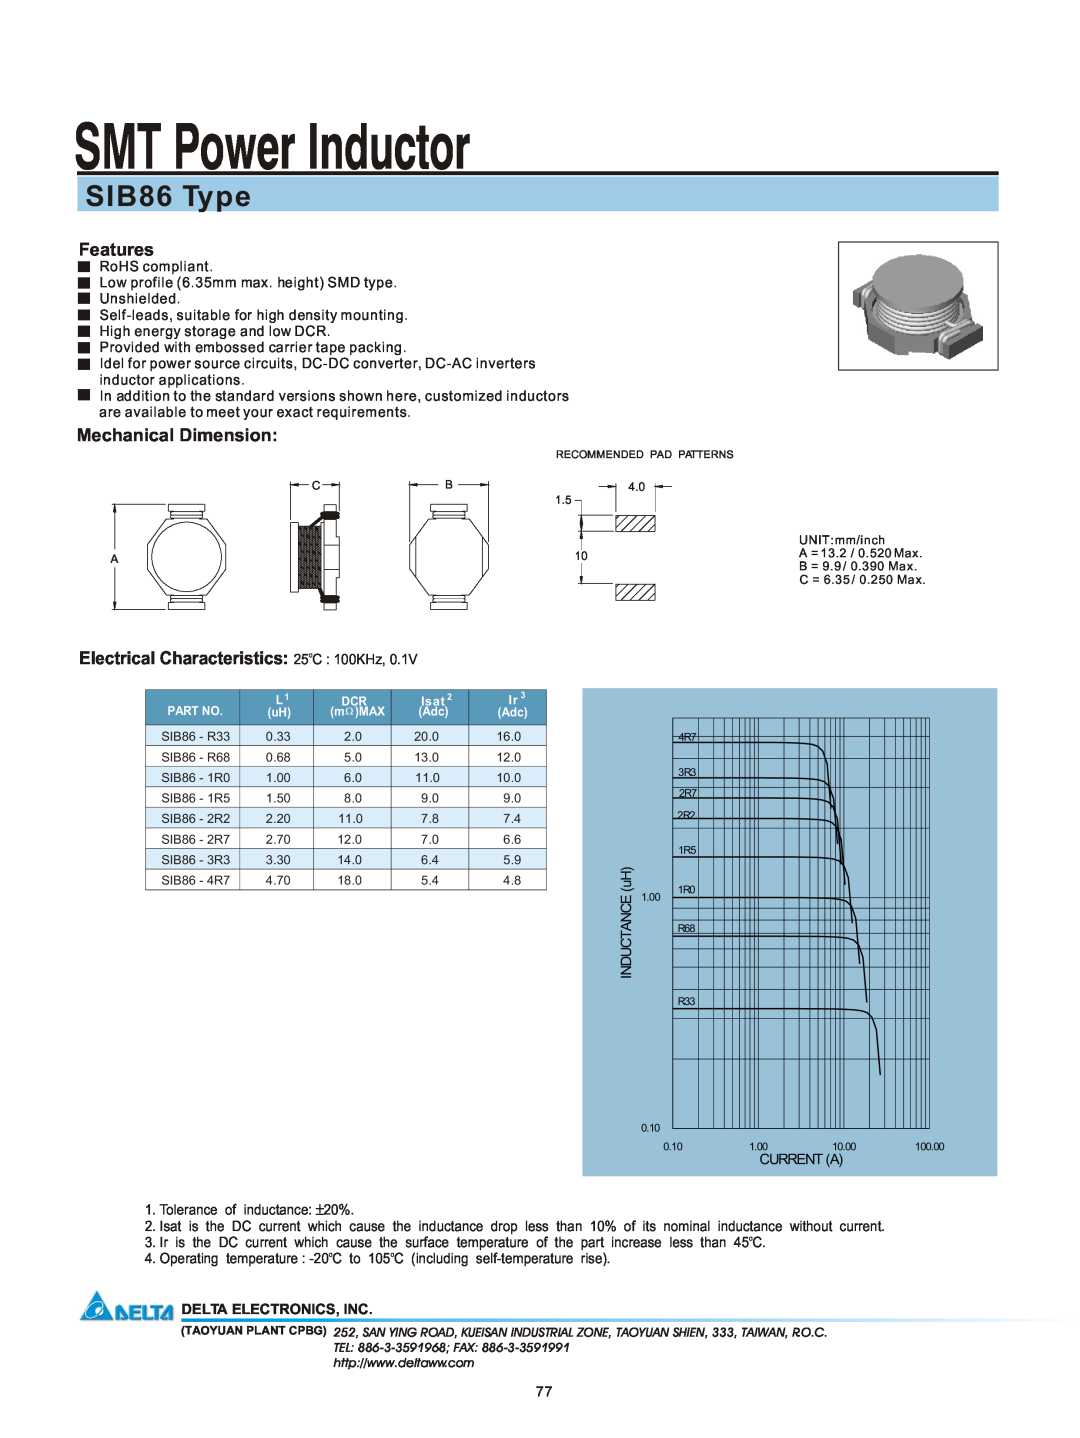 Delta Electronics manual SMT Power Inductor, SIB86 Type, Features, Mechanical Dimension, Delta Electronics, Inc 